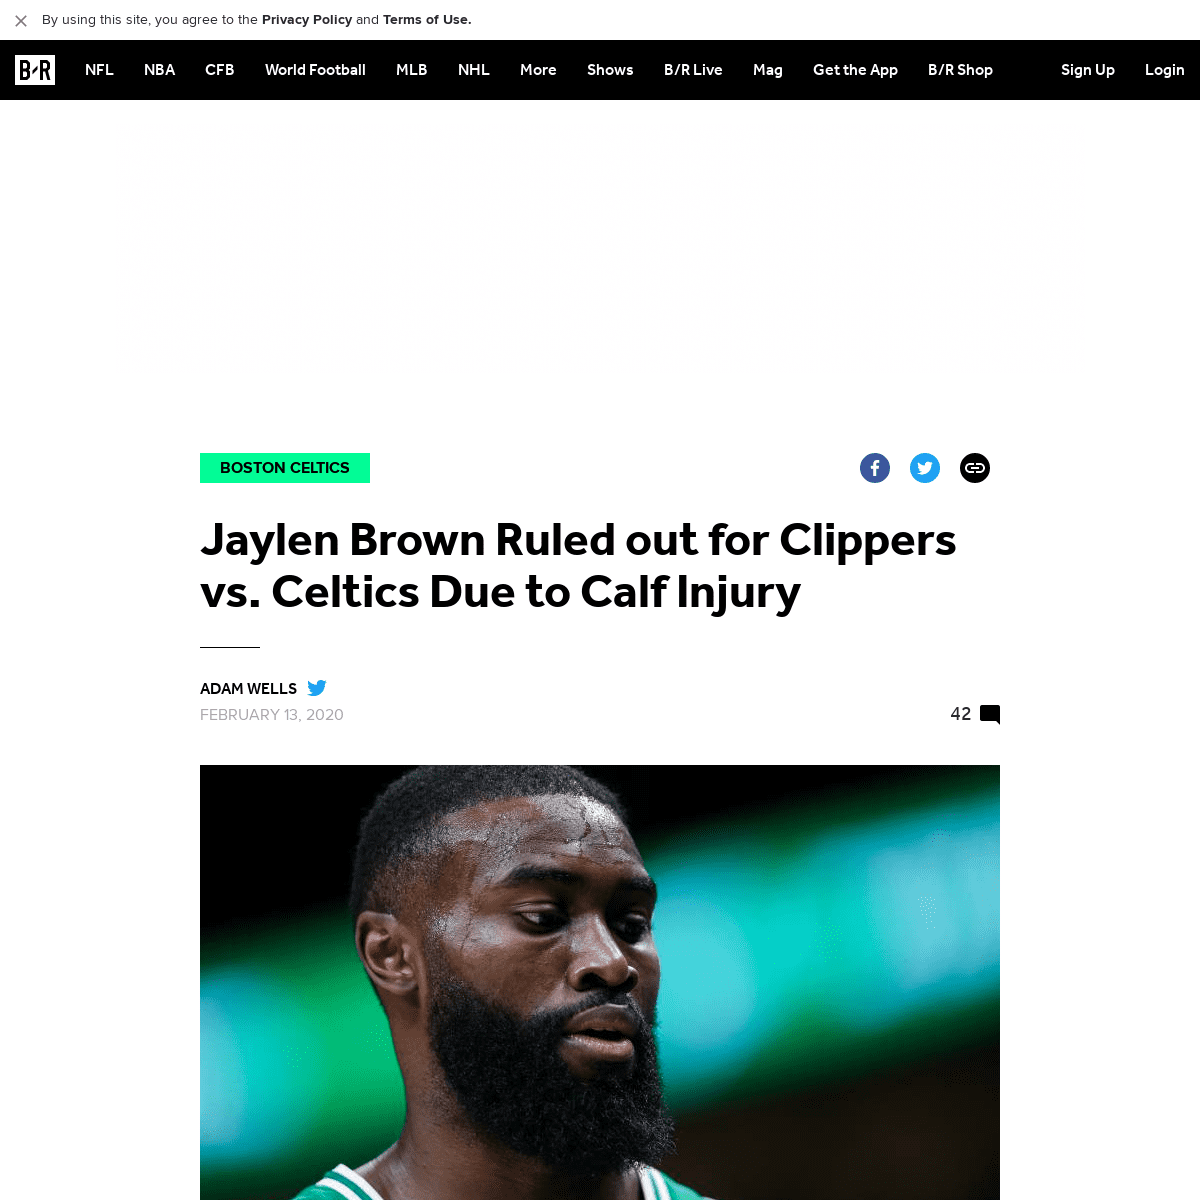 A complete backup of bleacherreport.com/articles/2875066-jaylen-brown-ruled-out-for-clippers-vs-celtics-due-to-calf-injury